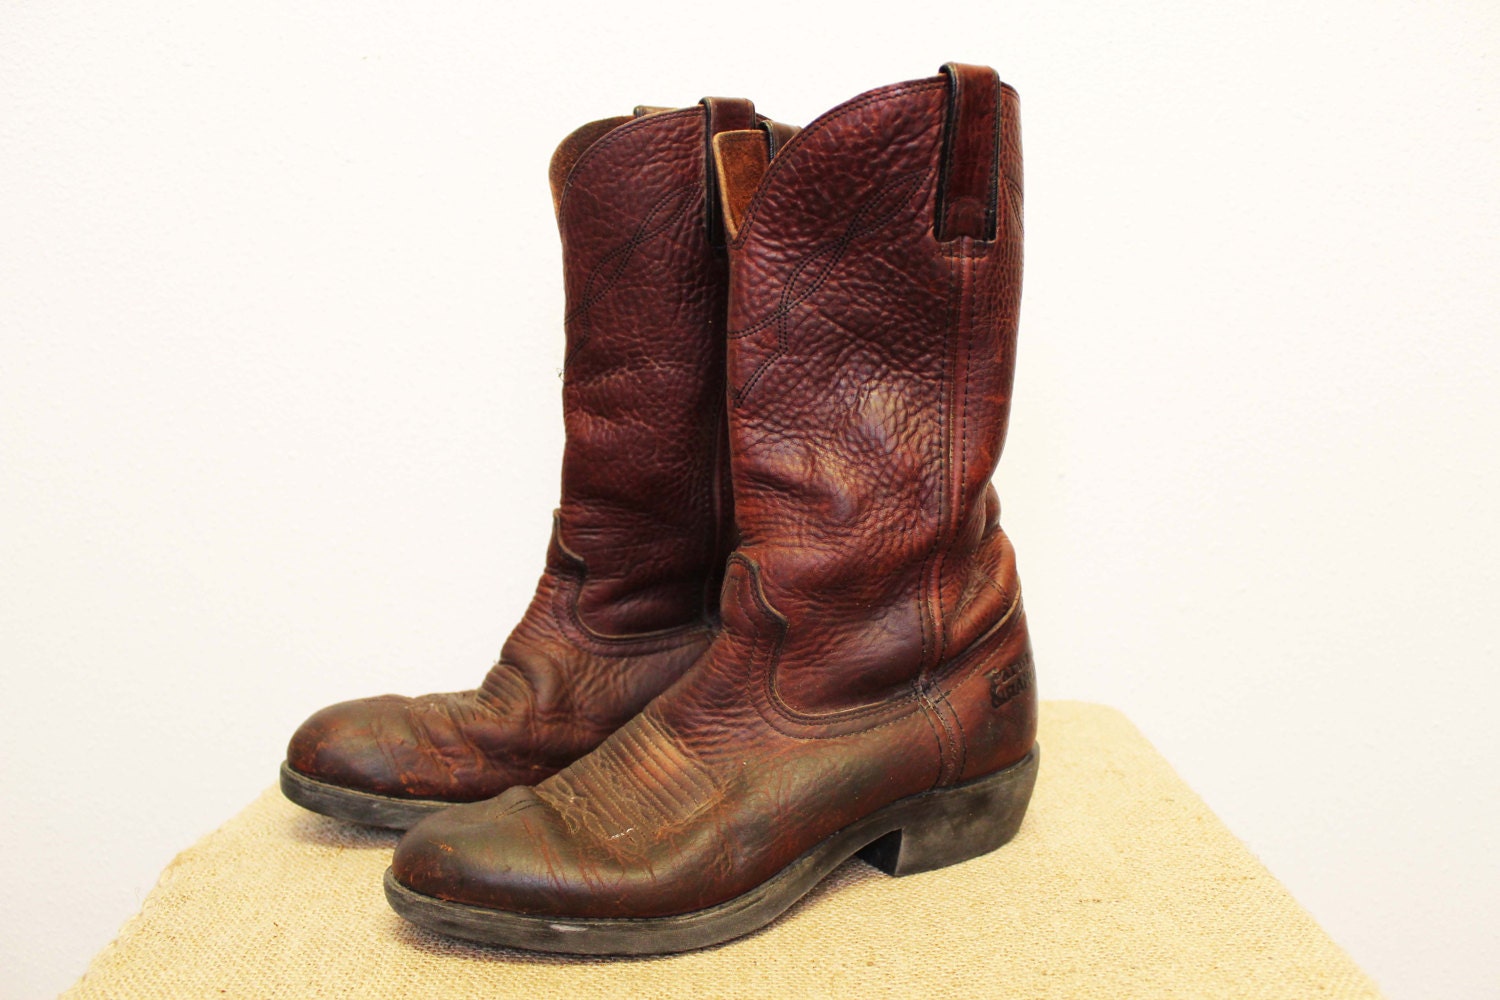 leather ranch boots rustic distressed men's 8D women's